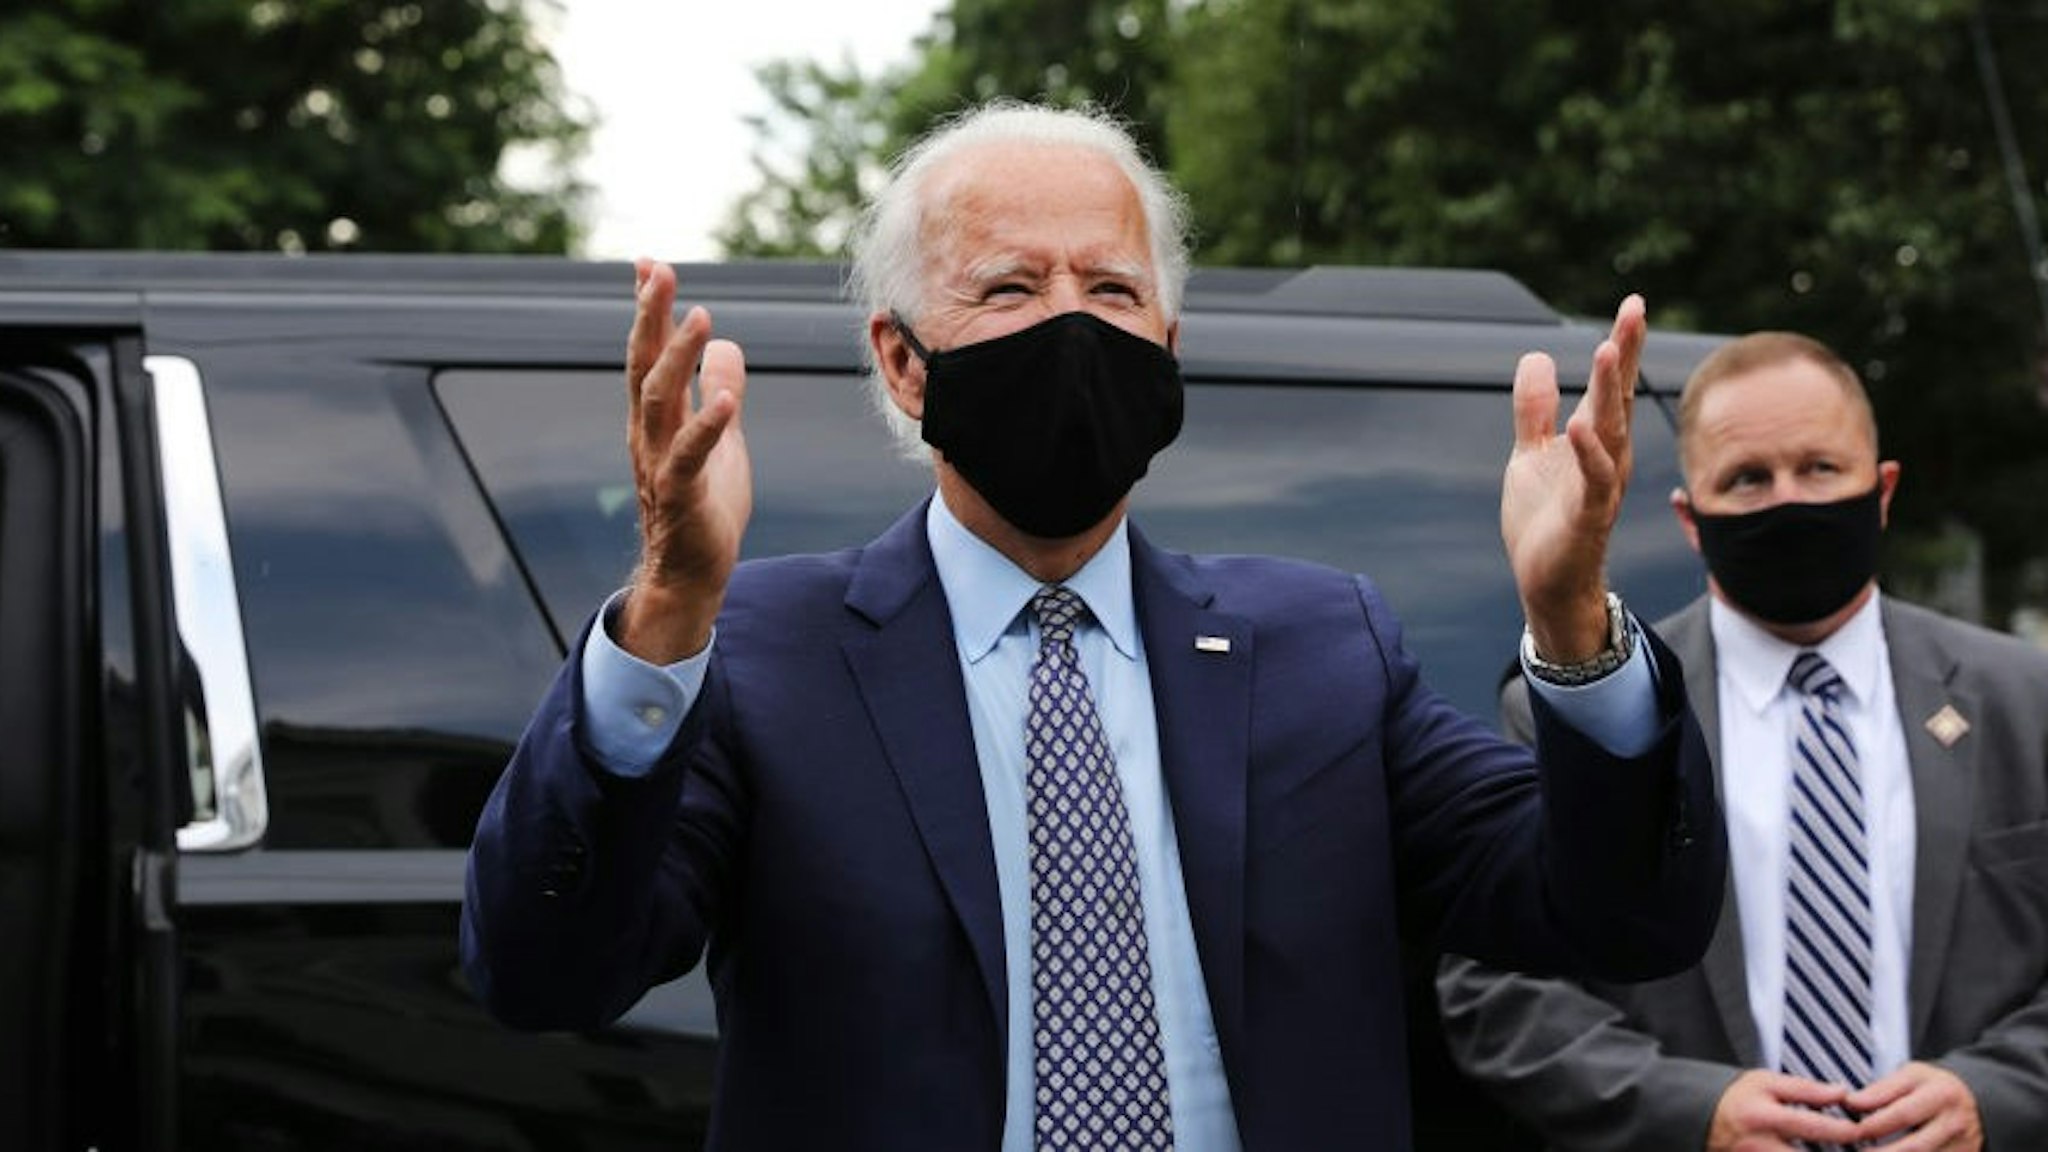 SCRANTON, PENNSYLVANIA - JULY 09: The presumptive Democratic presidential nominee Joe Biden stops in front of his childhood home on July 09, 2020 in Scranton, Pennsylvania. The former vice president, who grew up Scranton, toured a metal works plant in Dunmore in northeastern Pennsylvania and spoke about his economic recovery plan. With fewer than four months until the election, polls continue to show Biden leading in Pennsylvania which is a battleground state in the race for the presidency. (Photo by